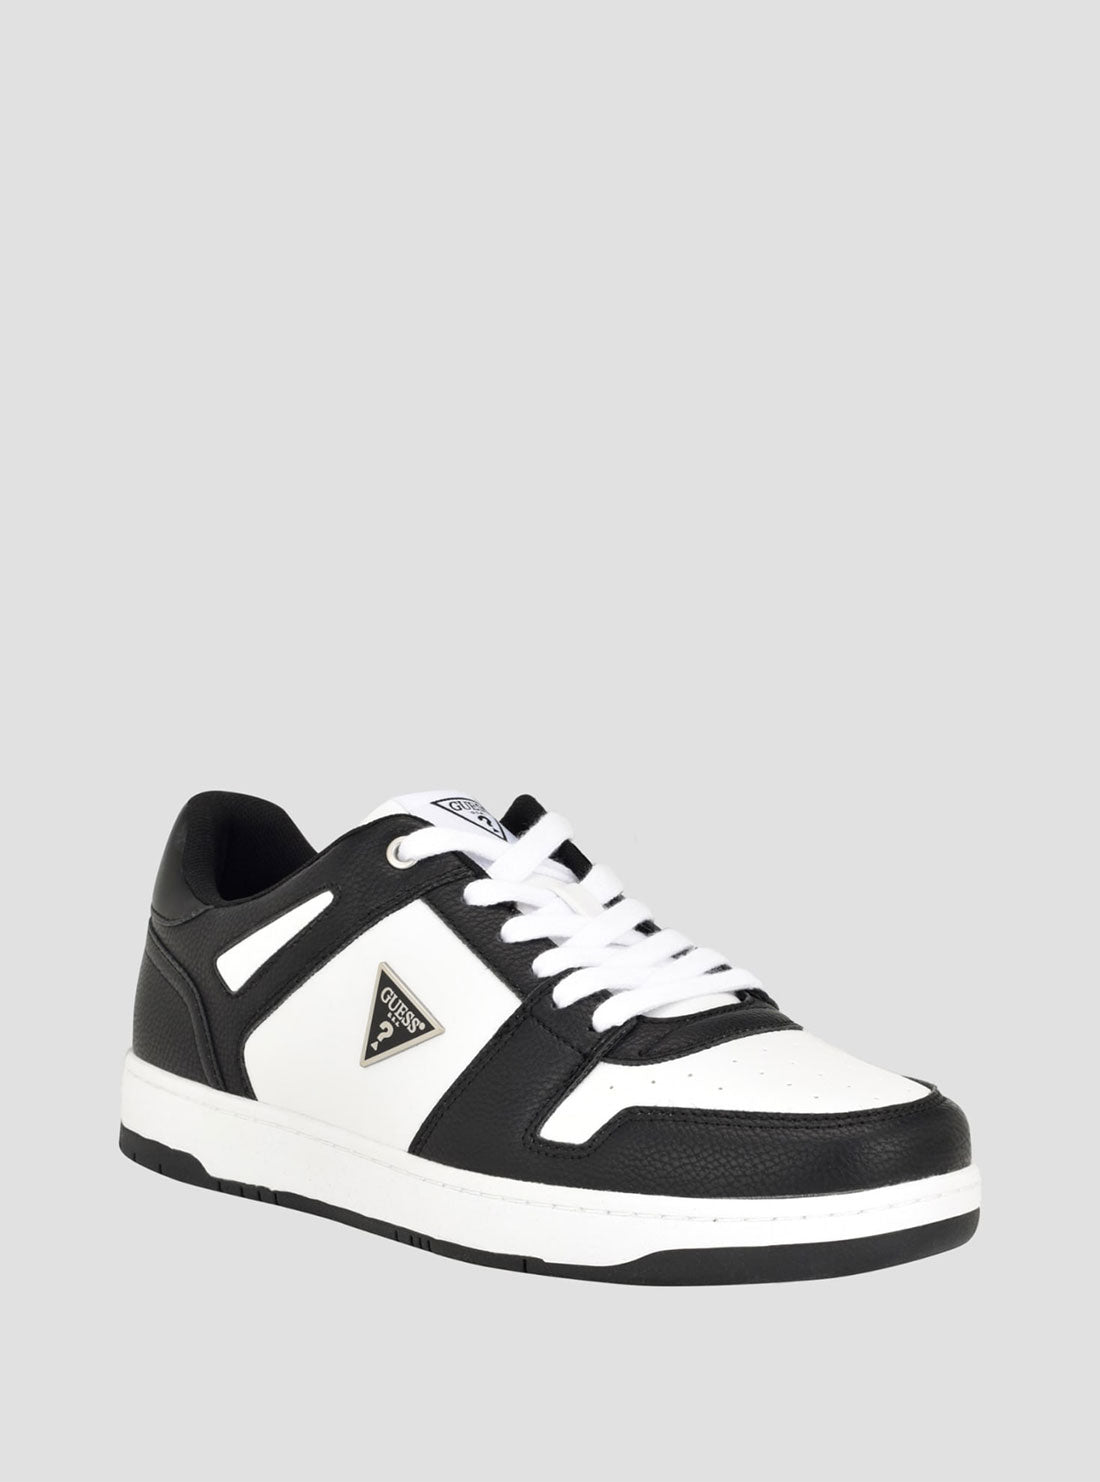 GUESS White Black Tarky Low-Top Sneakers front view